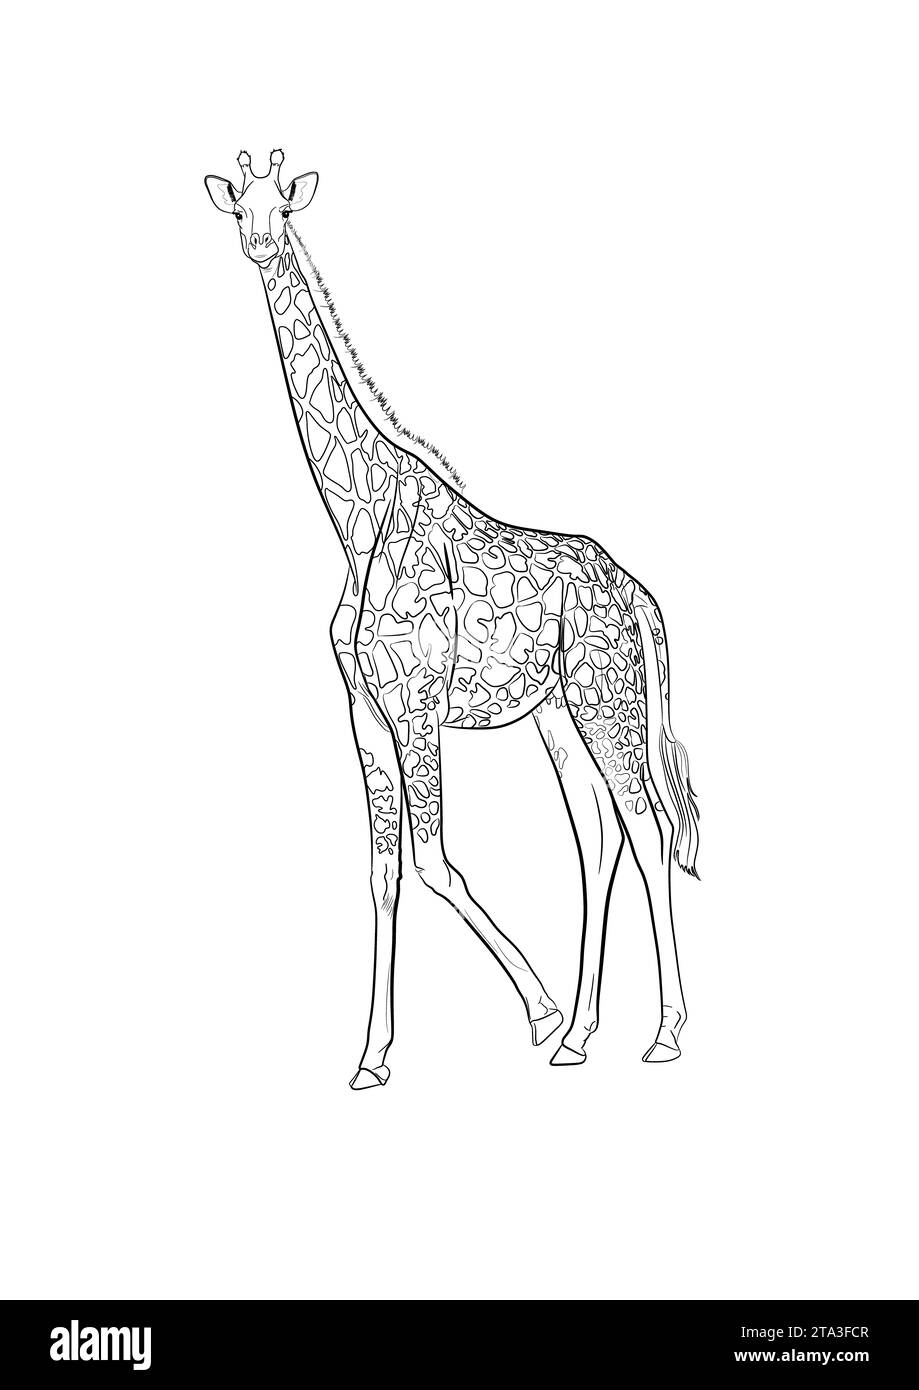 A detailed vector illustration of a majestic giraffe Stock Photo